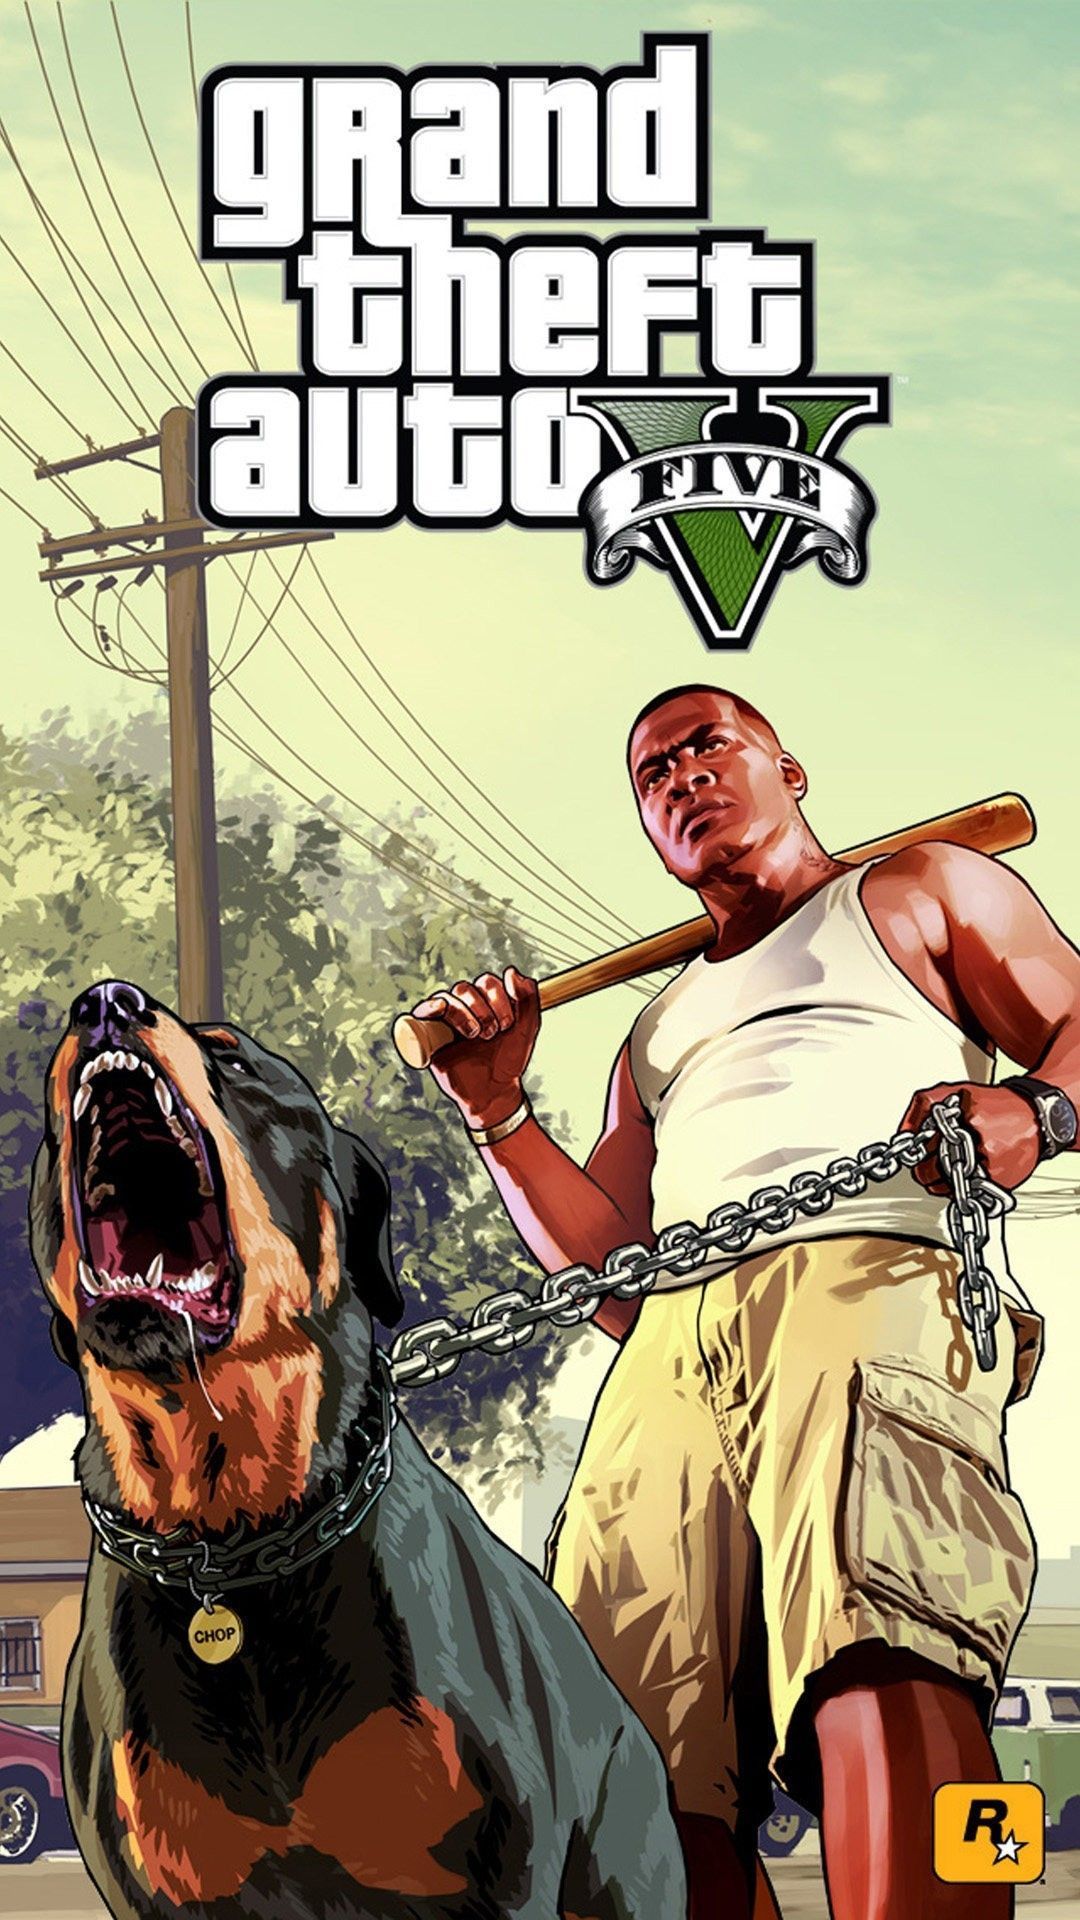 Gta V HD Wallpaper Android Is Best Wallpaper on flowerswallpaper.info, if you like it. #iphone #android #wallpaper #Gta #V #Hd